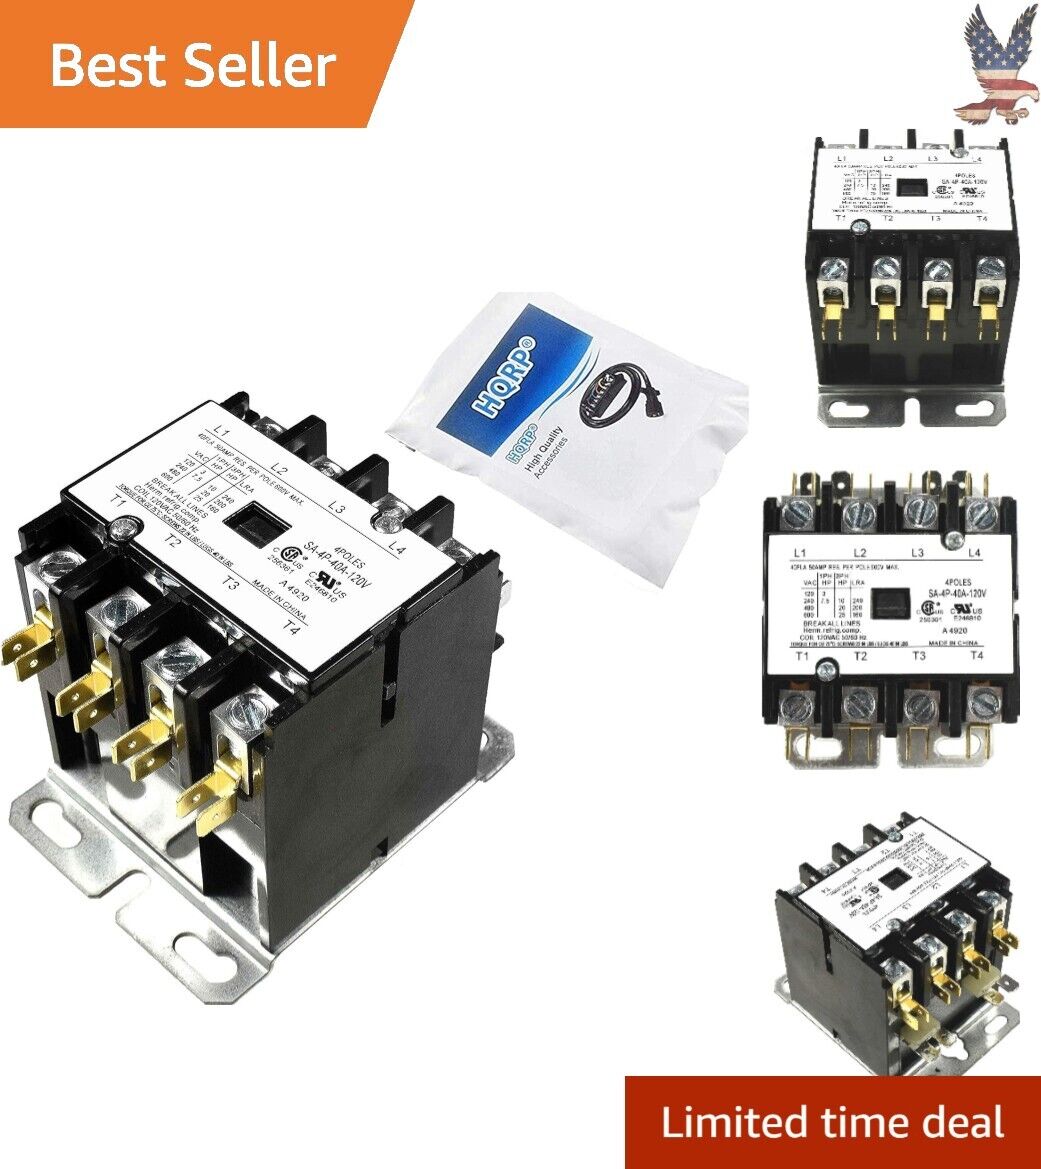 Heavy-Duty 4-Pole 40 Amp Coil 120V AC Contactor - Universal Compatibility